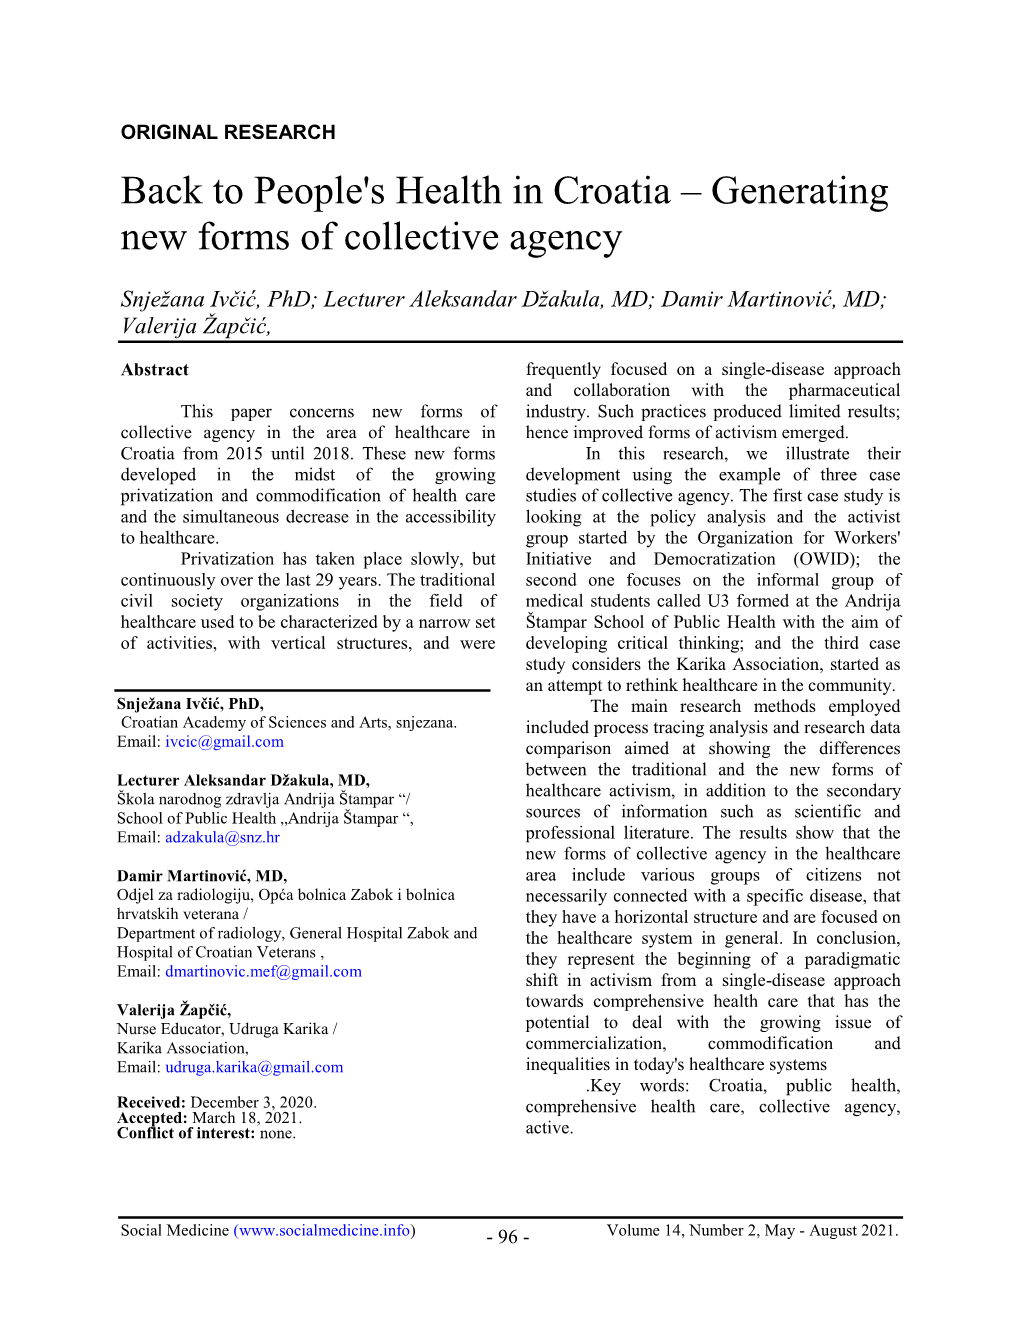 Back to People's Health in Croatia – Generating New Forms of Collective Agency